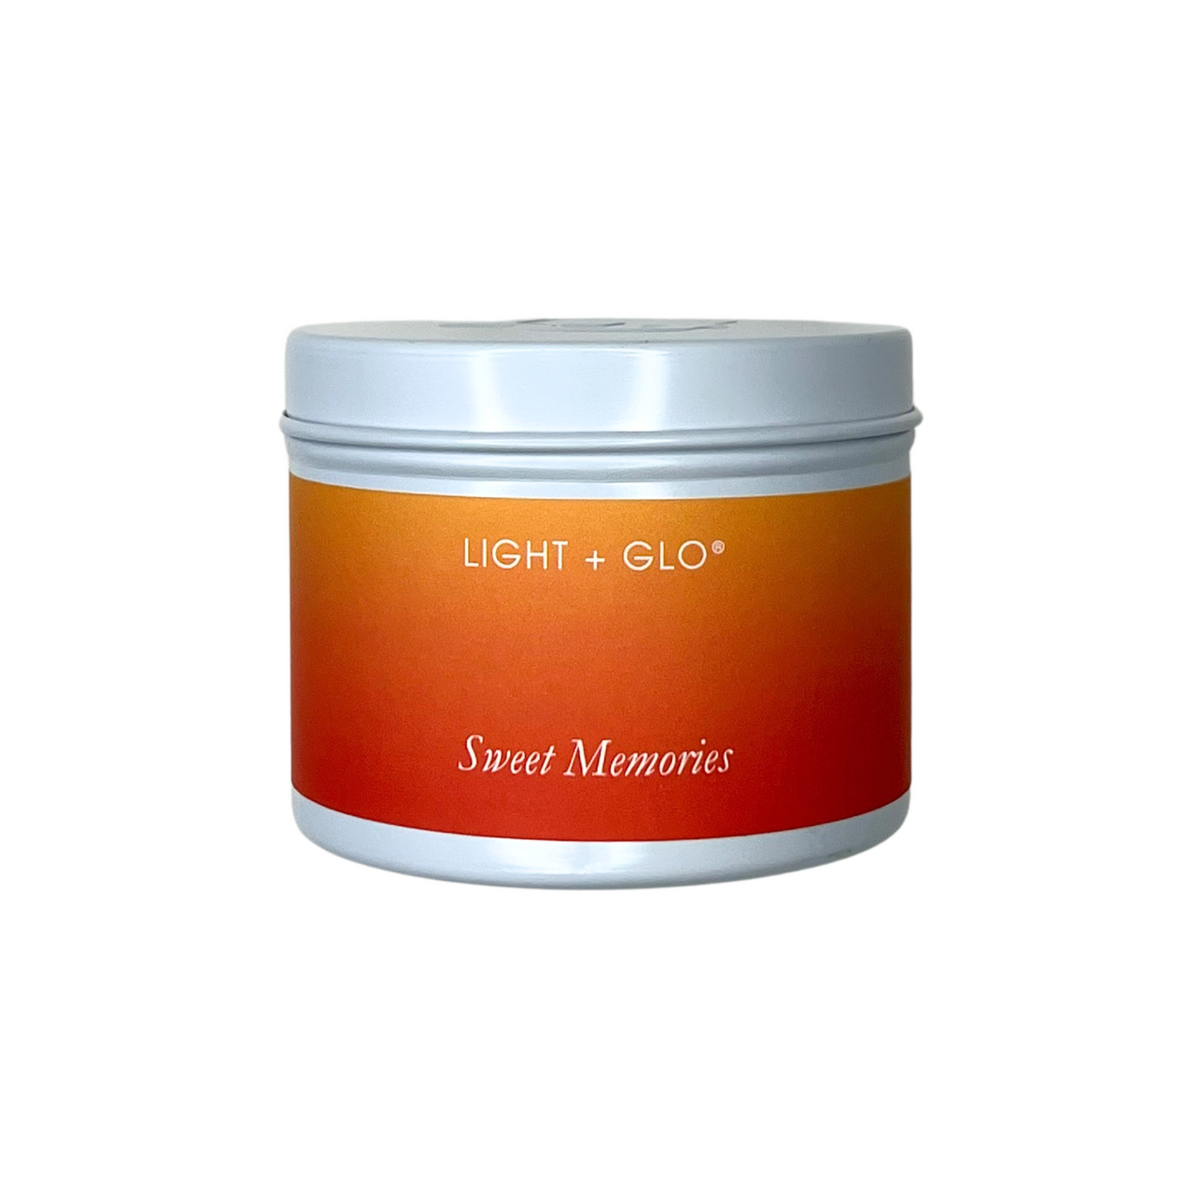 Santorini Travel Candle - Sweet Memories | Luxury Candles &amp; Home Fragrances by Light + Glo